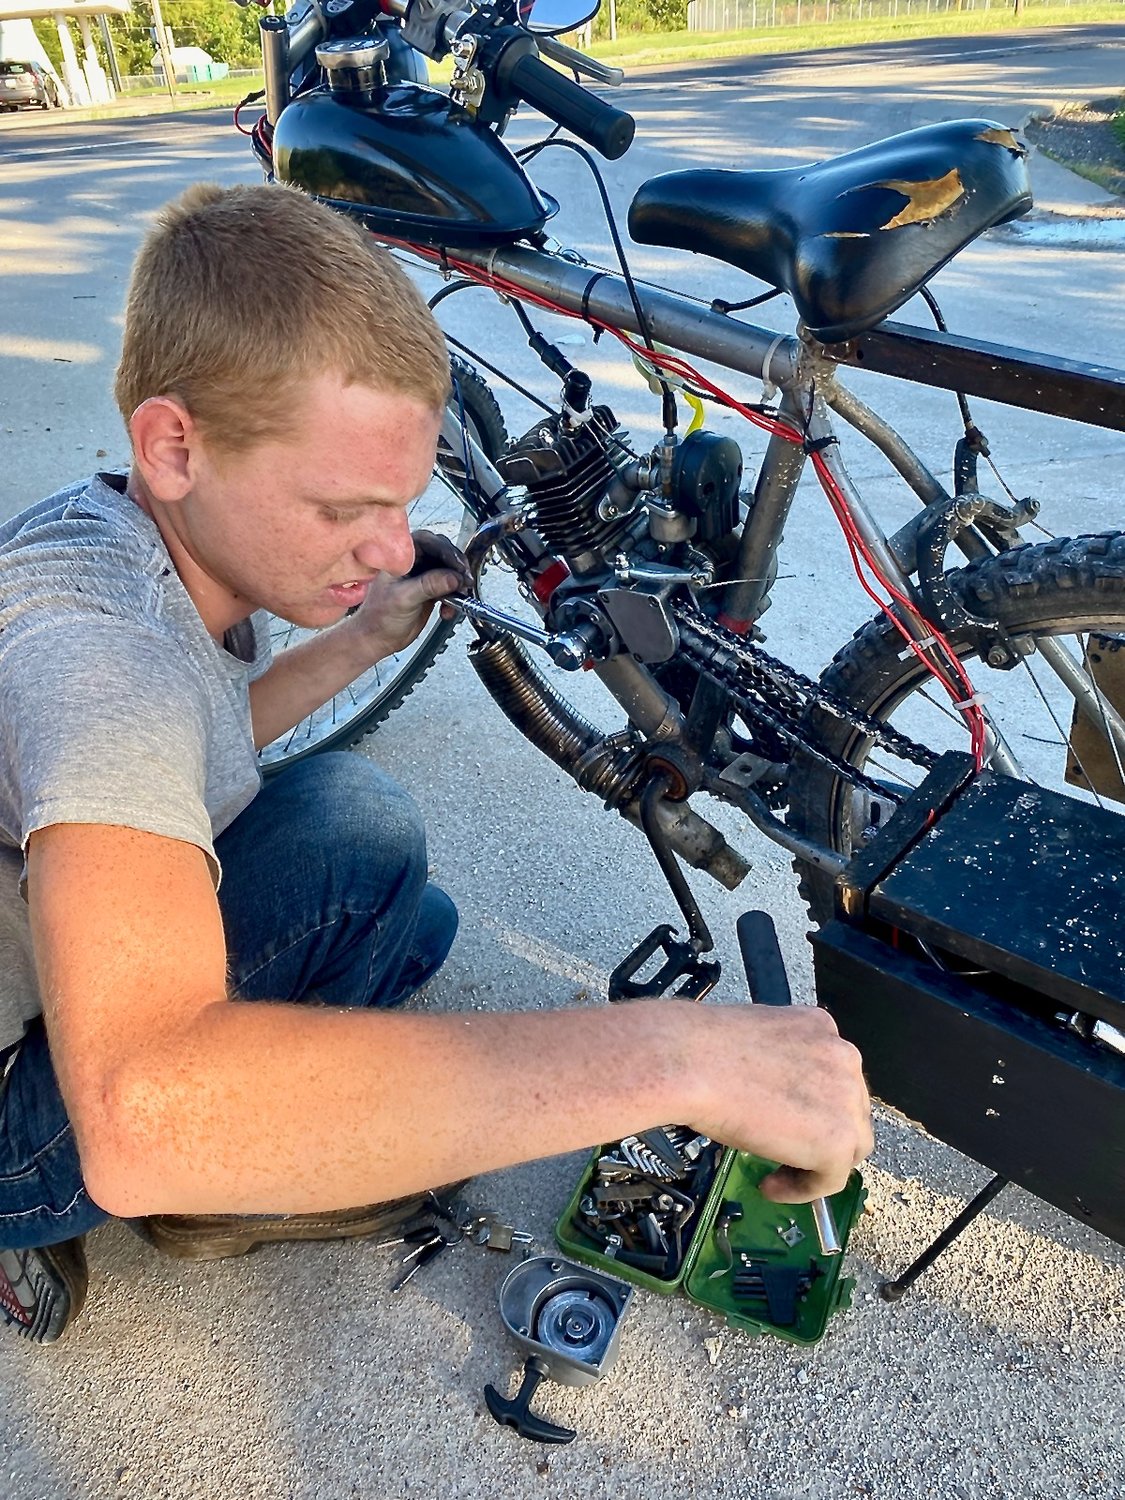 Cody Barton, 16, of Stockton finds a way to travel around town and make his way down fishing paths. Barton has built a motorized kit bike. Barton admits it breaks down occasionally, but he carries tools to work on it. His bike, and the noise it makes, has been a topic of conversation at a couple of city council meetings with the aldermen agreeing that an innovative young person like Cody should be encouraged to continue to build and create. (See Mayor Brandon Cahill’s related statement.)